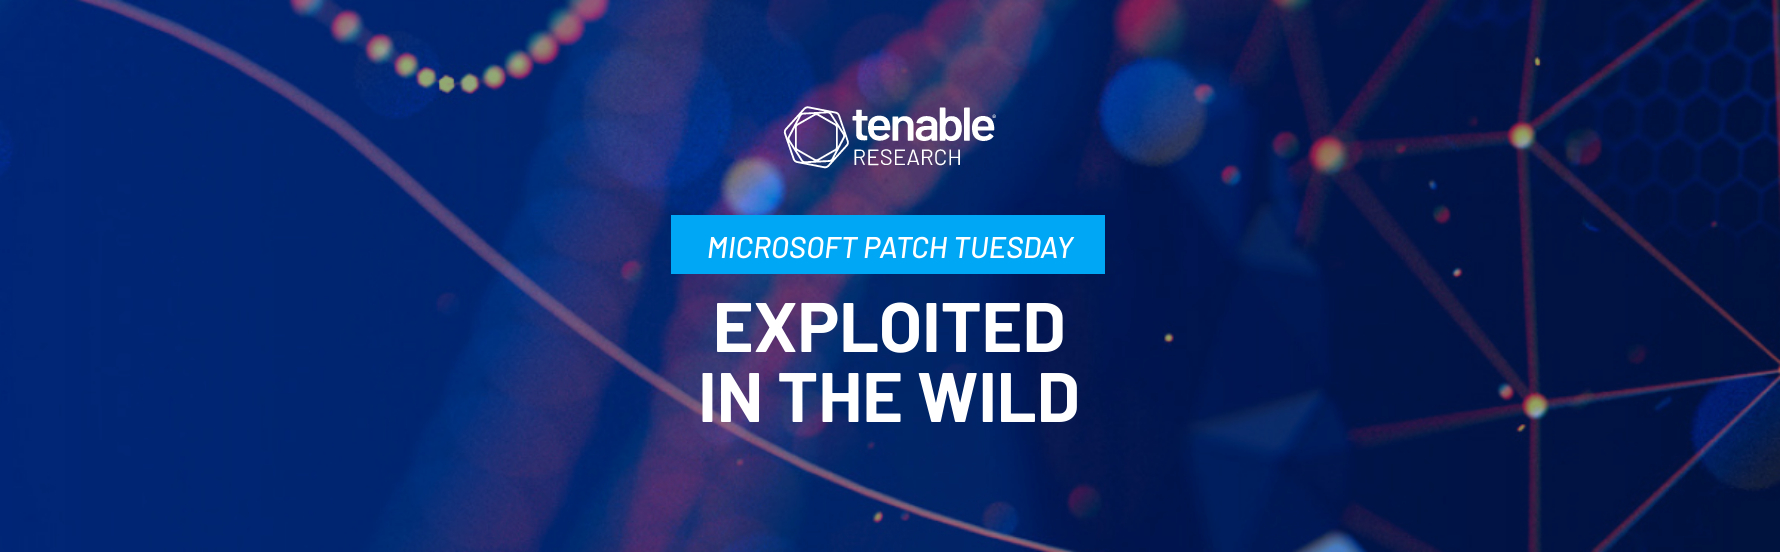 Tenable's blog post summarizing Microsoft's monthly Patch Tuesday release. A vulnerability patched in this month's release has been exploited in the wild.